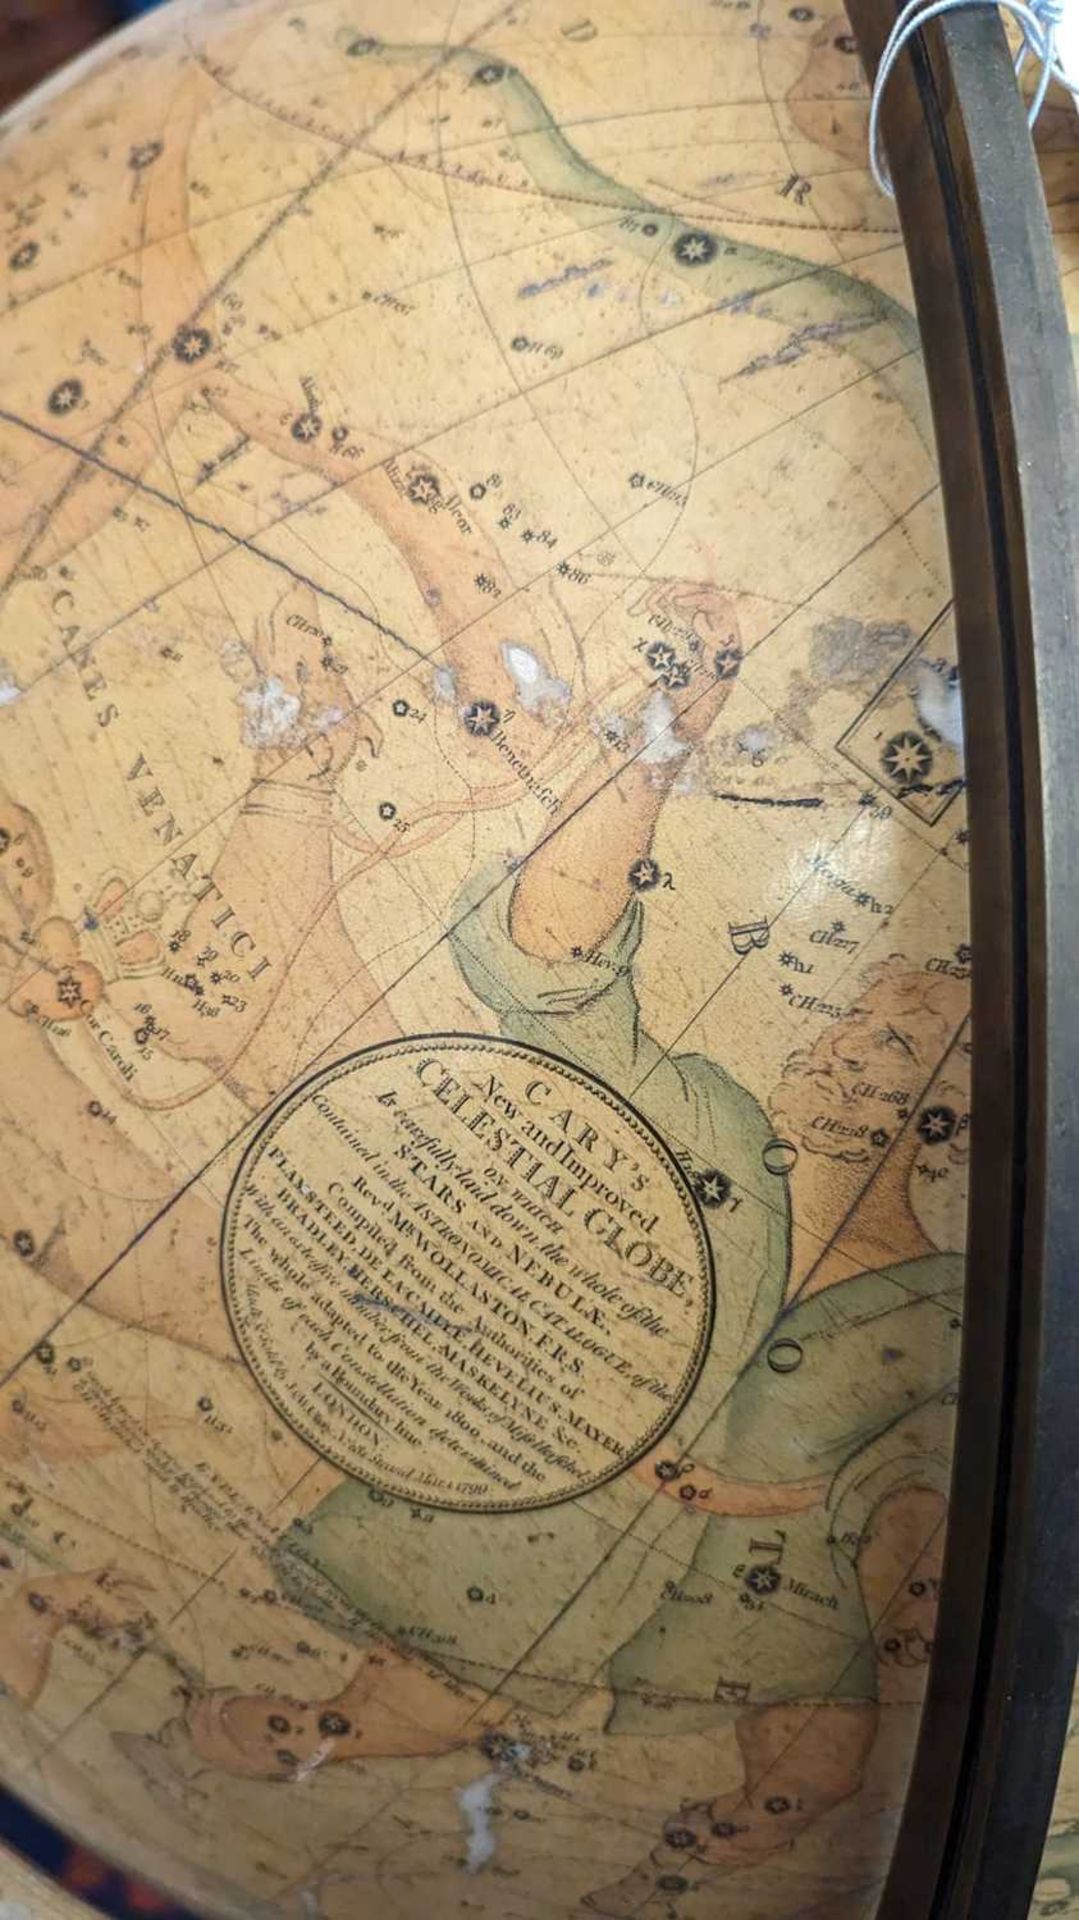 A large celestial library globe by J & W Cary, - Image 13 of 84